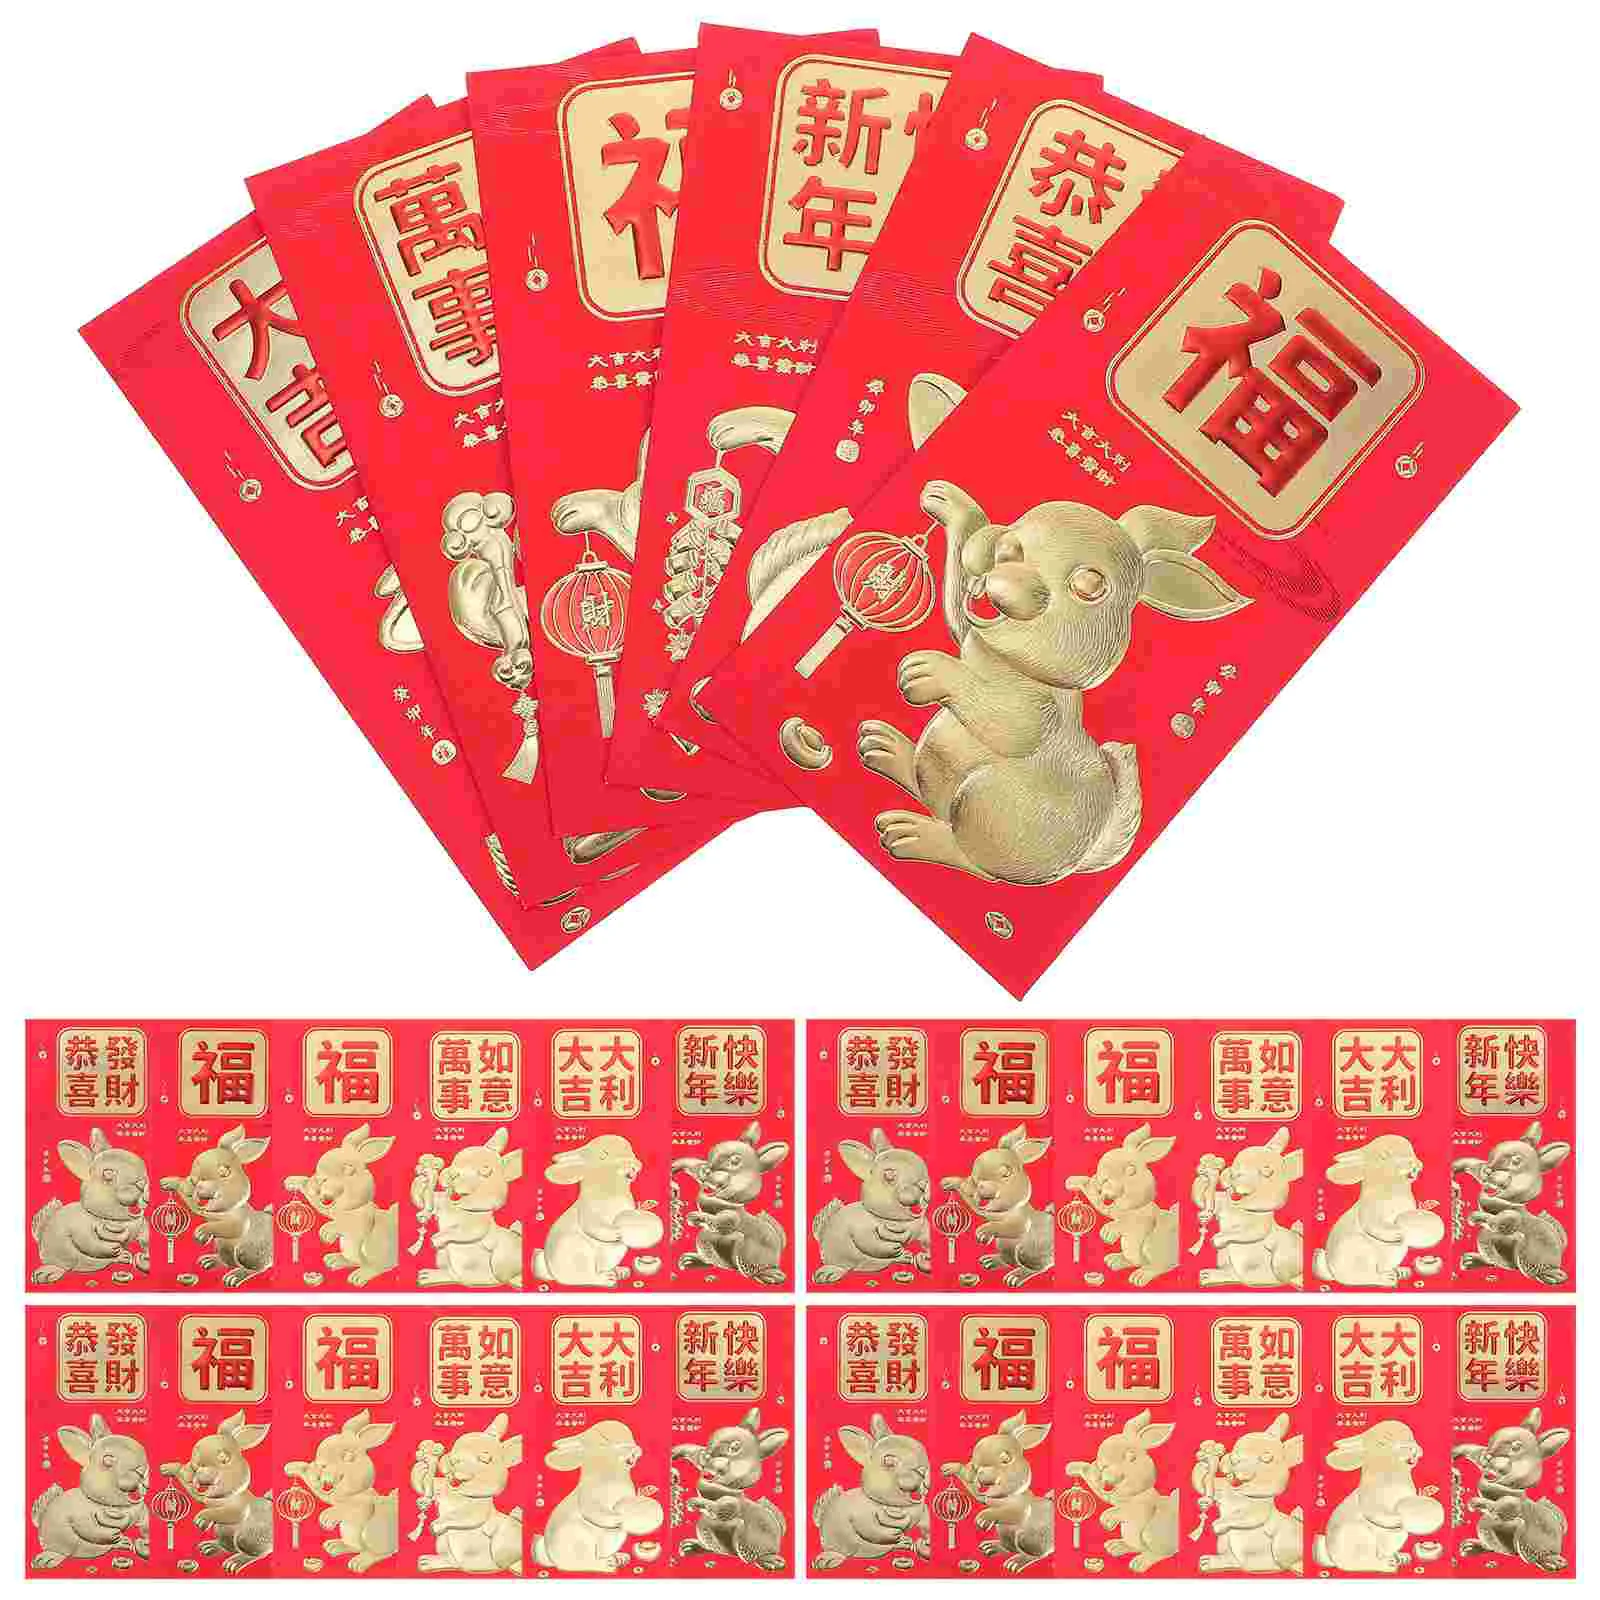 

2023 Red Envelope Year of The Rabbit Packet Chinese Style Envelopes Luck Money Bag Bunny Pocket Creative Traditional Coin